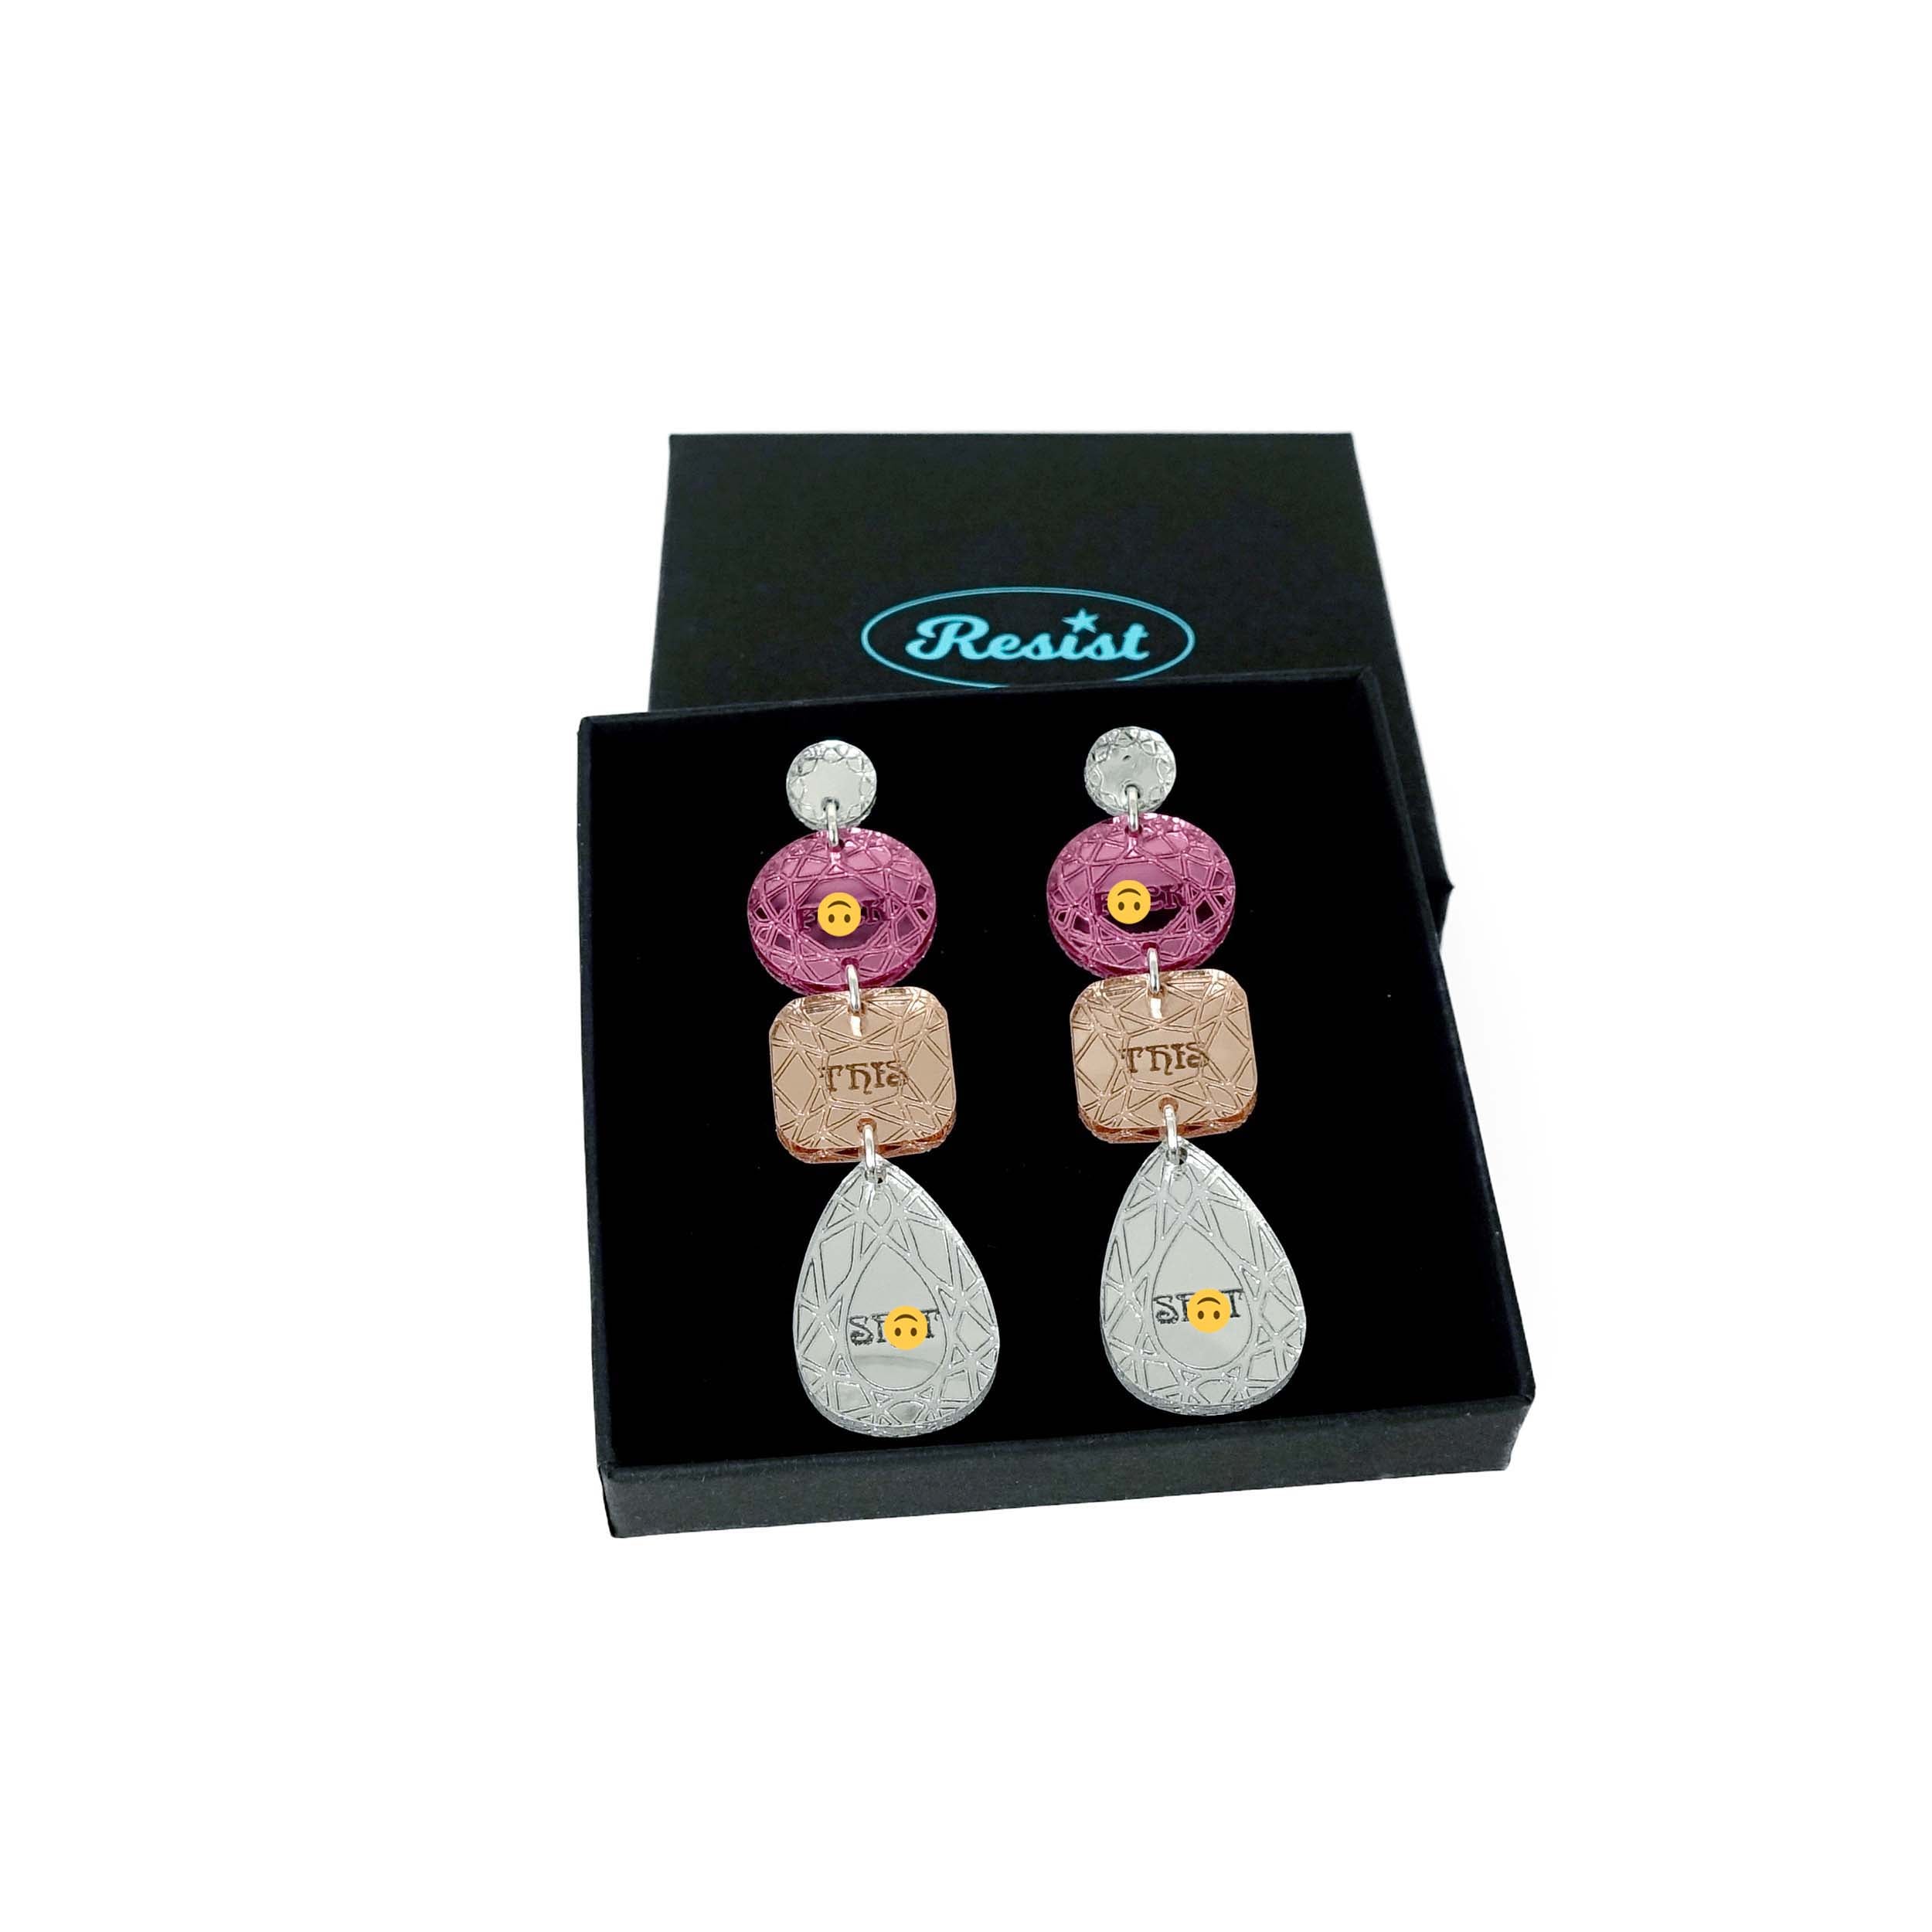 Sweary austerity jewel earrings in pink, rose gold and silver shown in a Wear and Resist gift box. 